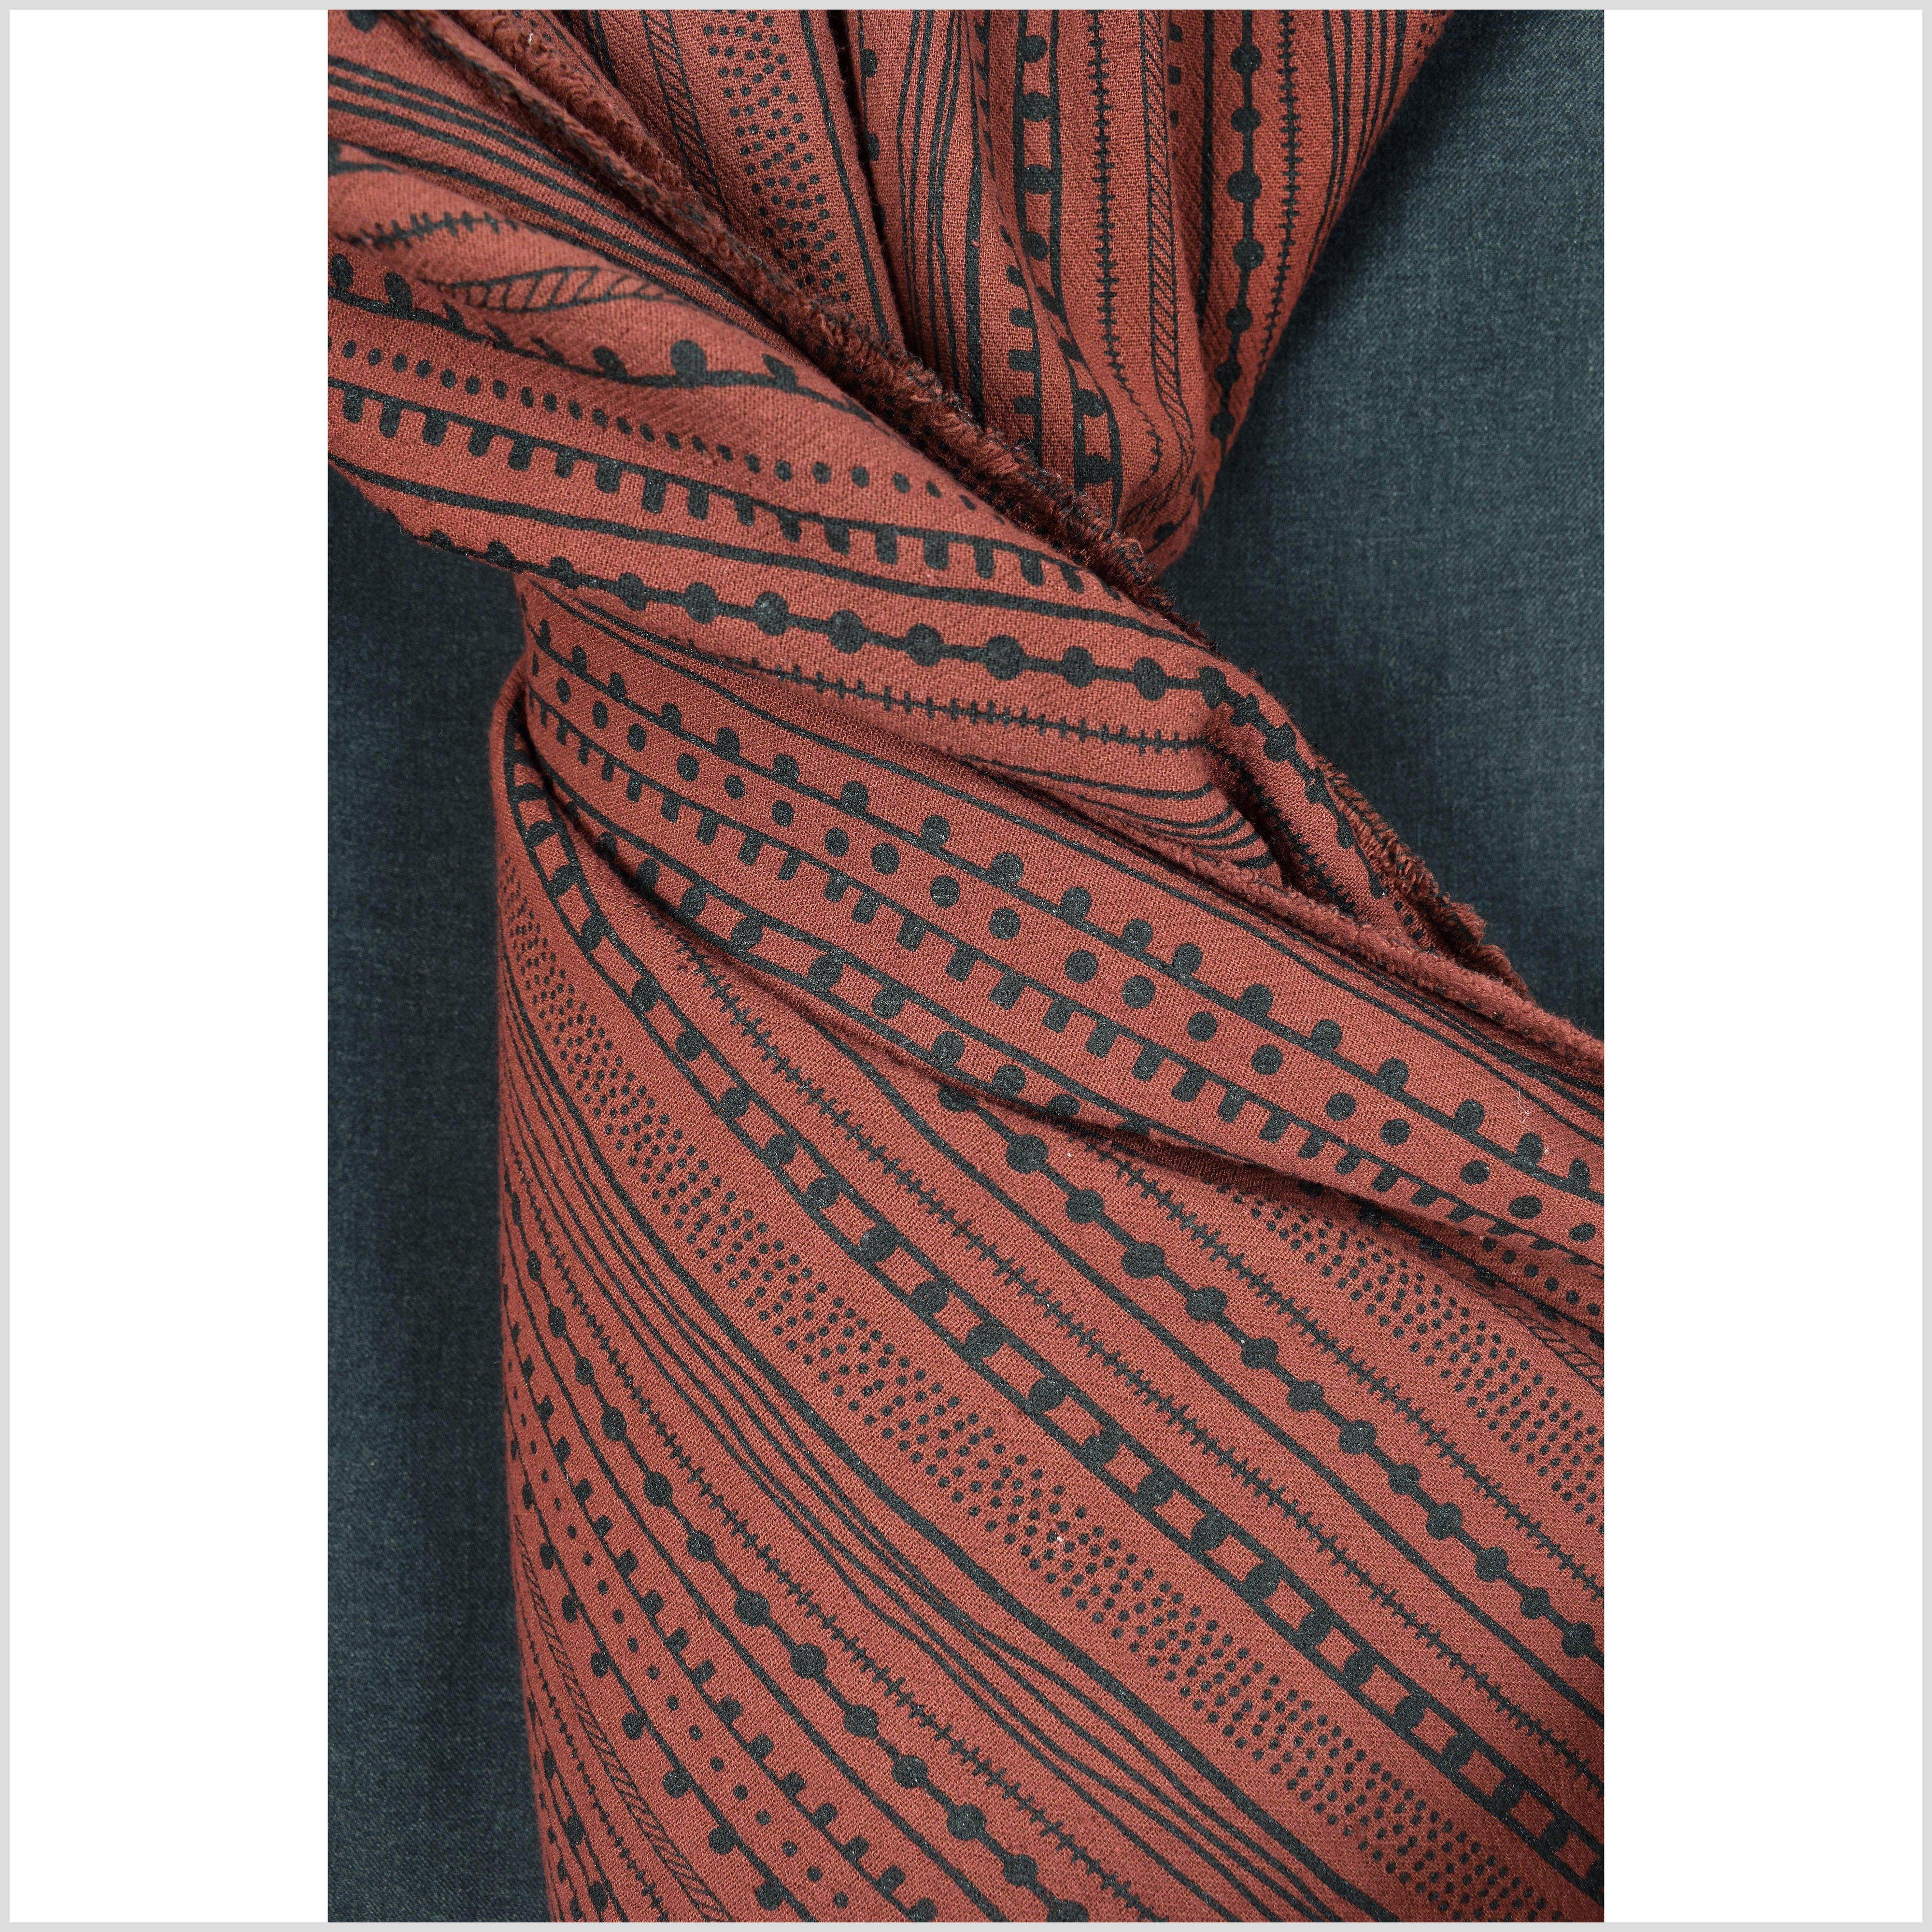 Rust copper brown textured cotton fabric, heavy weight and thick